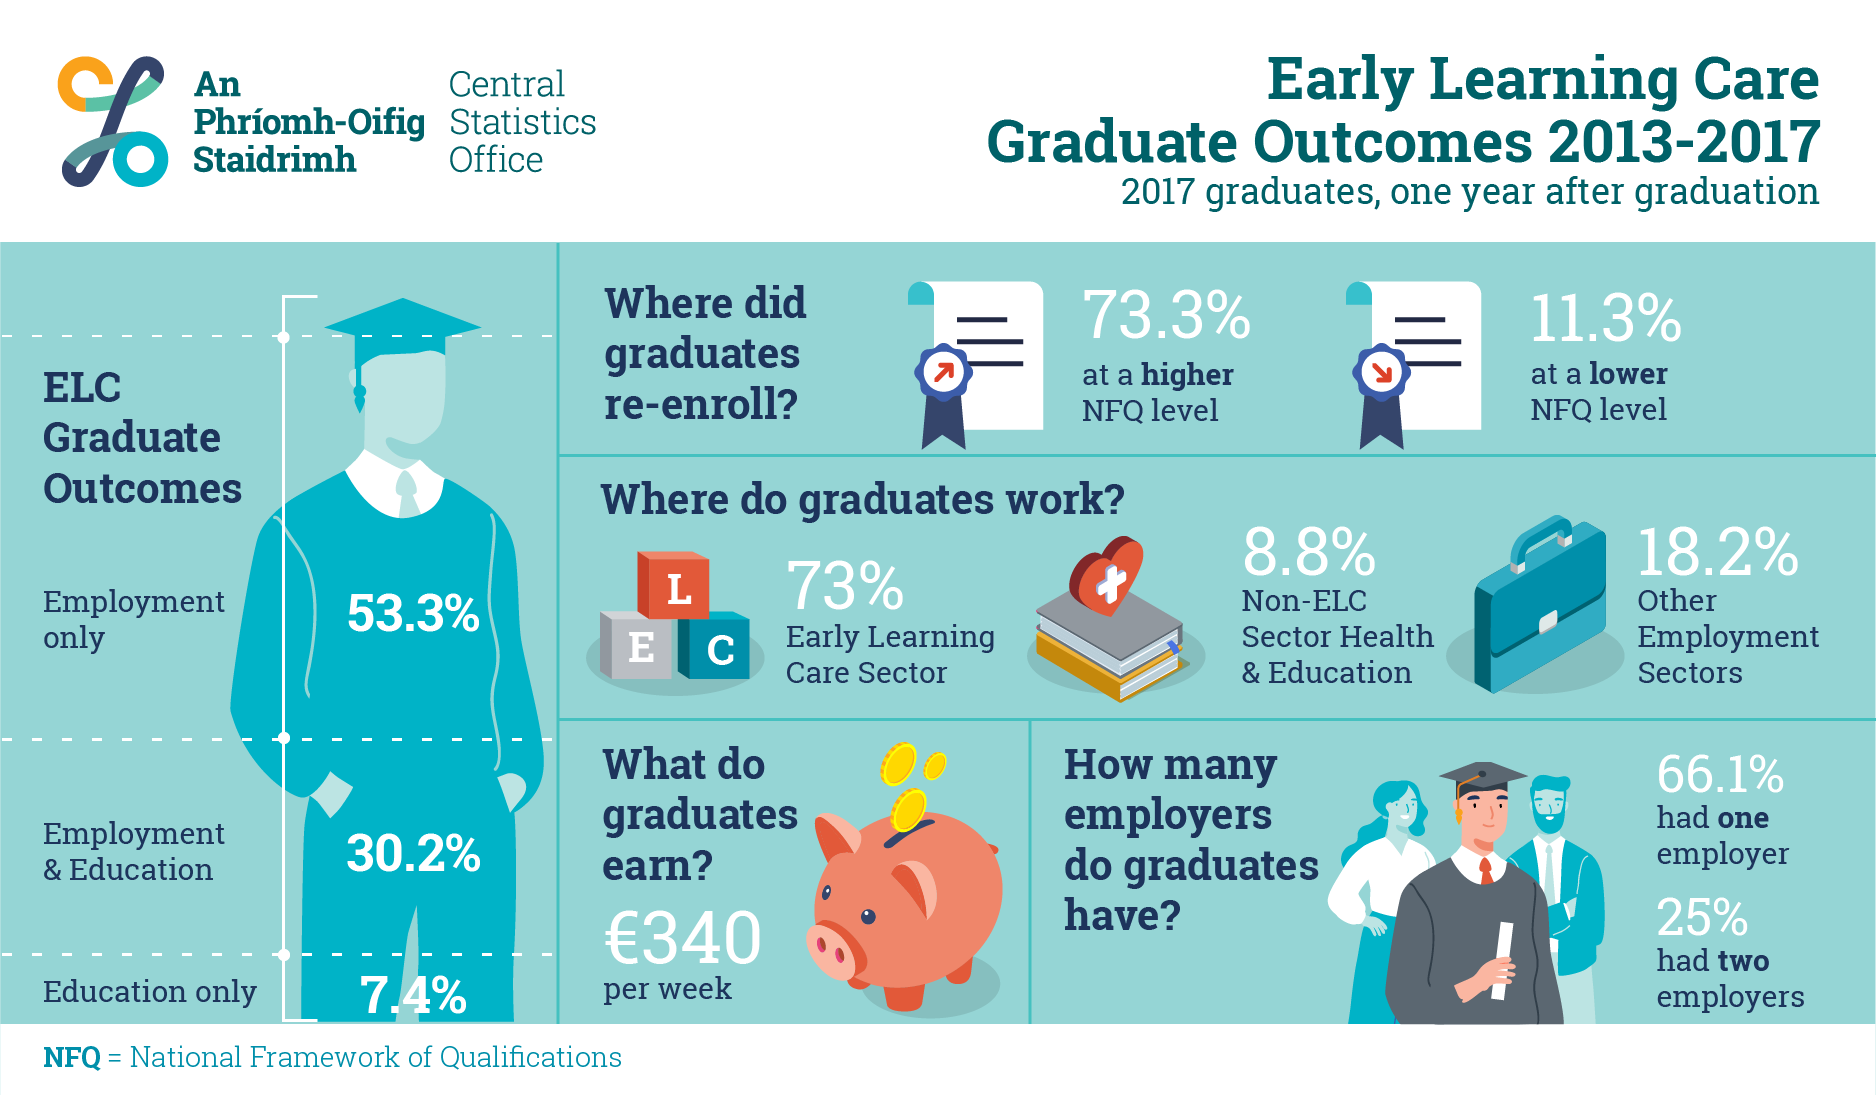 Early Learning Care Graduate Outcomes Infographic image